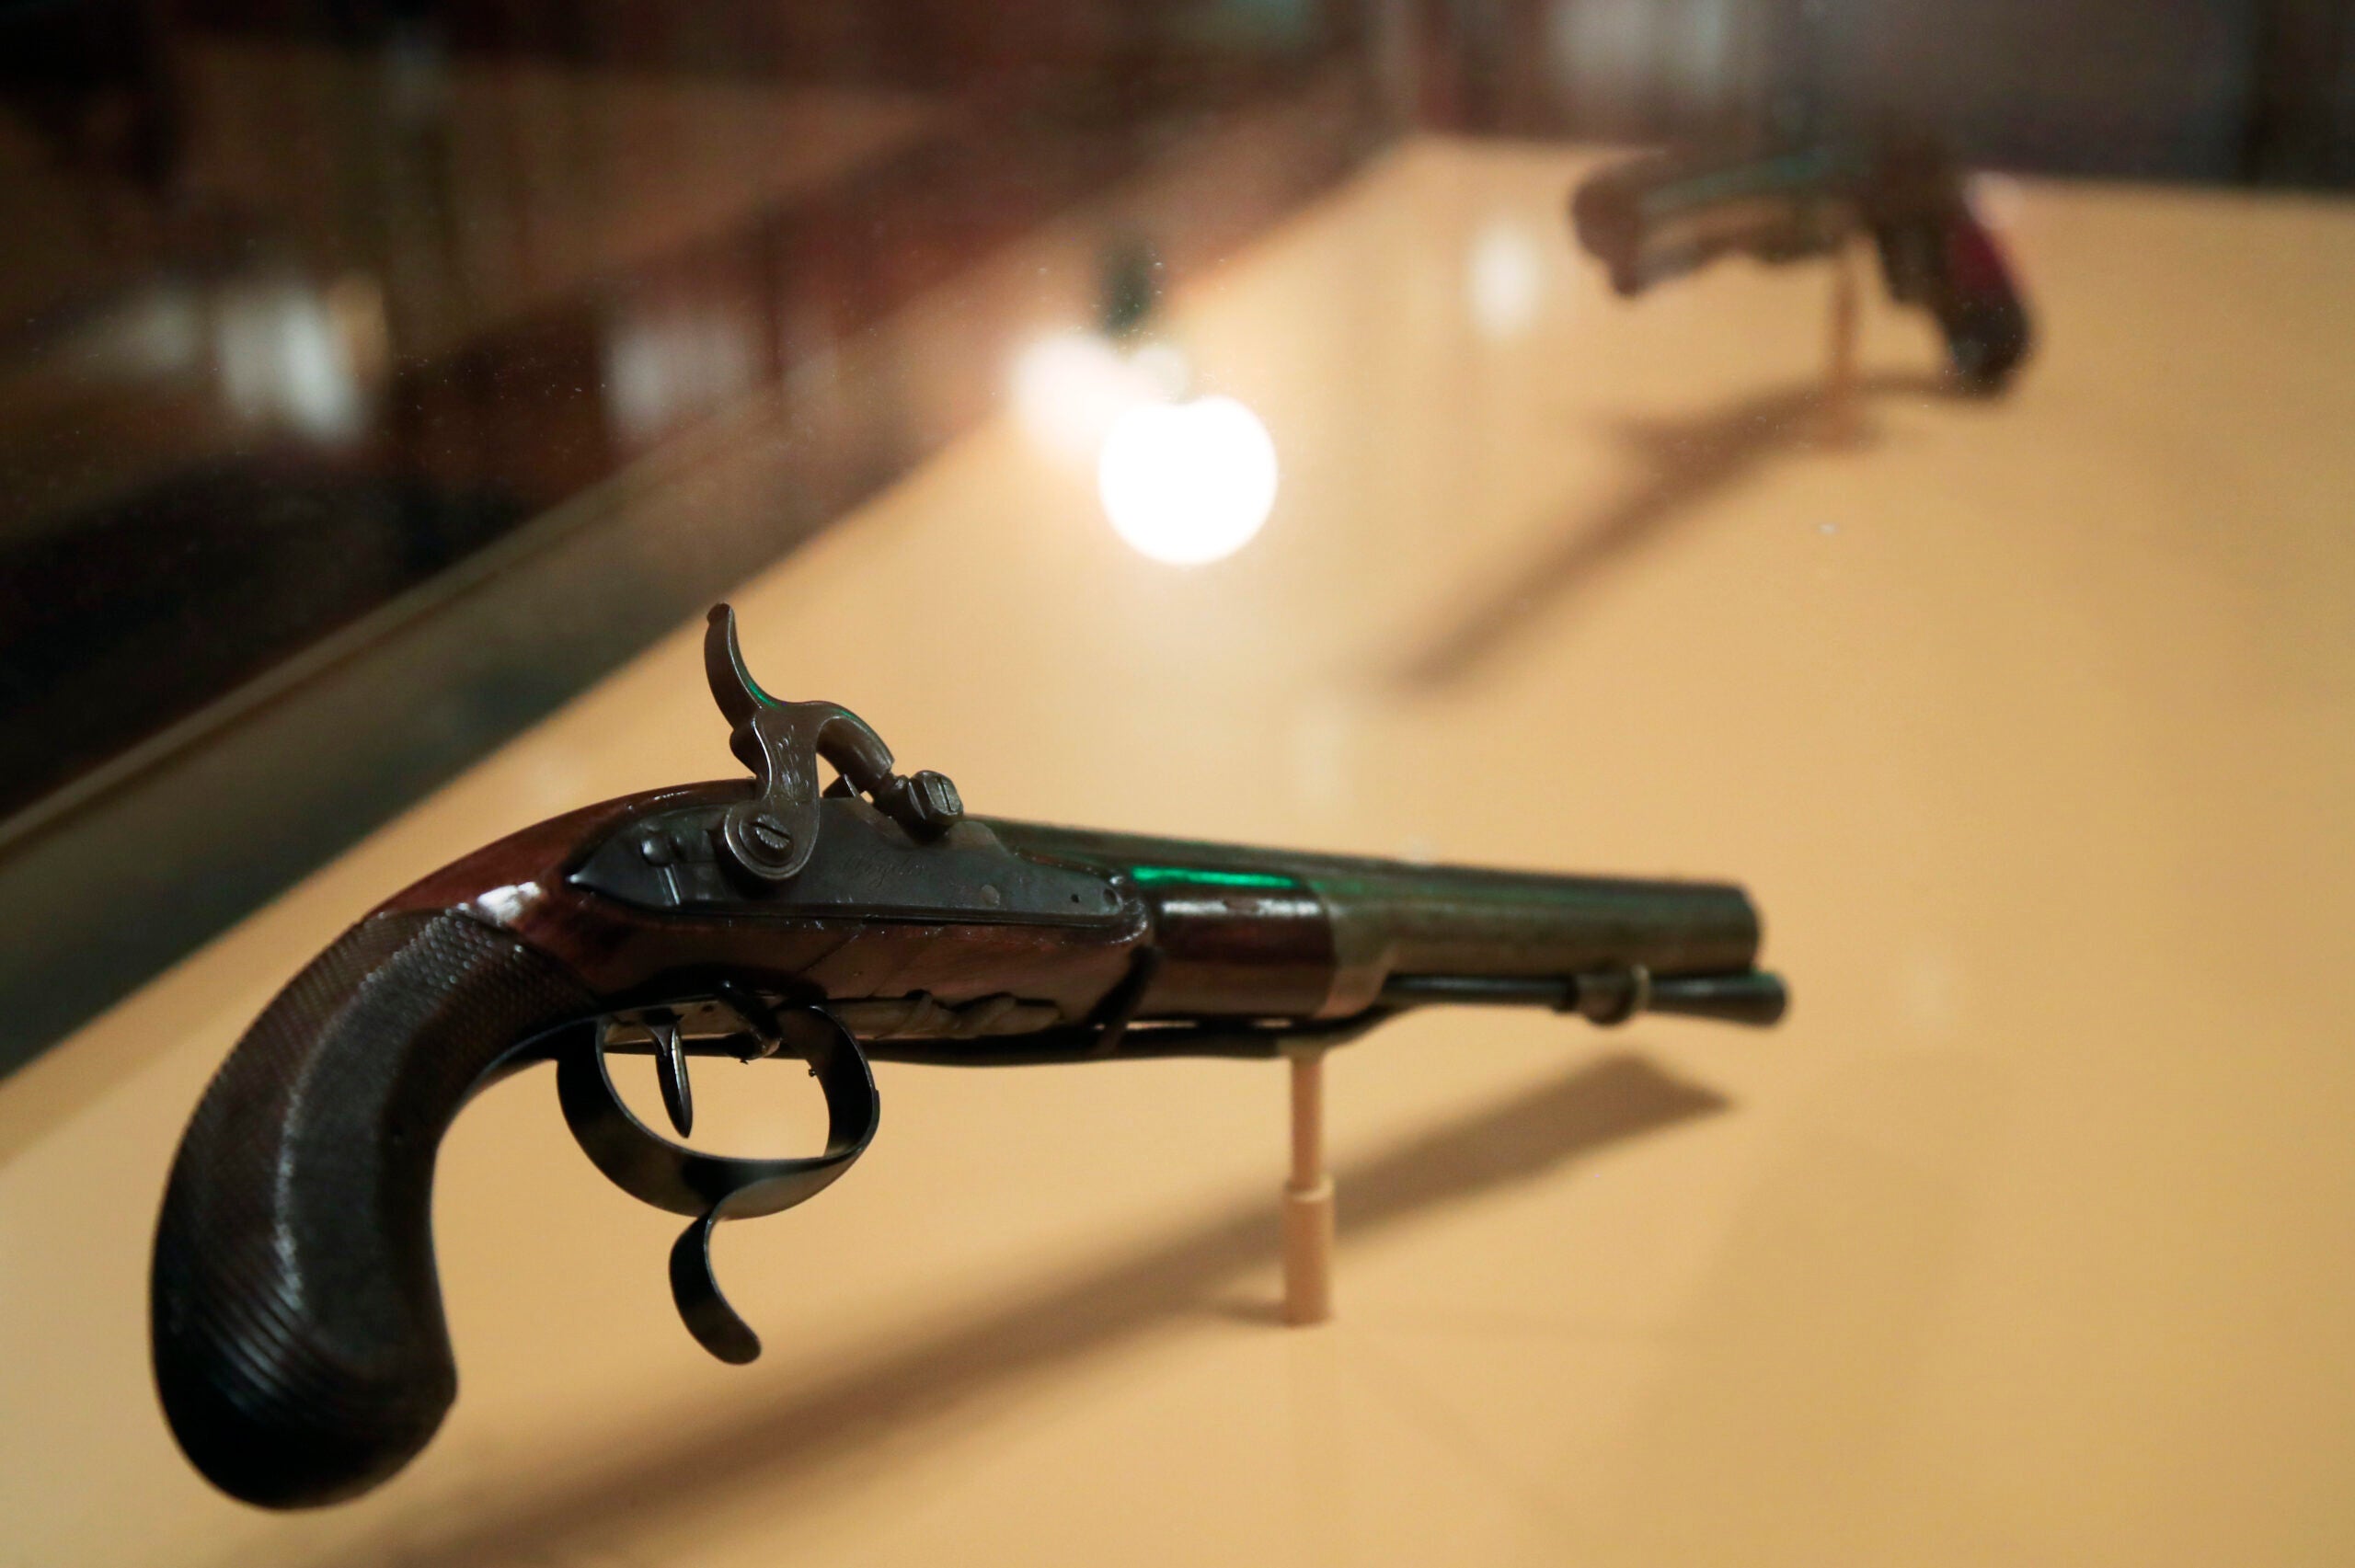 ADDS THAT THE PISTOL IN THE FOREGROUND WAS MODIFIED FROM A FLINTLOCK TO A CAP LOCK AT A LATER DATE - The original flintlock pistols made of walnut, brass and gold that were used in the July 11, 1804 duel with then-Vice President Aaron Burr, which resulted in the death of former secretary of treasury and a retired two-star Army General Alexander Hamilton, are displayed at Smithsonian National Postal Museum in Washington, Monday, June 11, 2018. The blockbuster show Hamilton is finally coming to the nation's capital and the city is preparing in ways that only Washington can. According to the Smithsonian Institution the pistol in the foreground was converted sometime during the Civil War era to a cap lock pistol from the original flintlock. (AP Photo/Manuel Balce Ceneta)